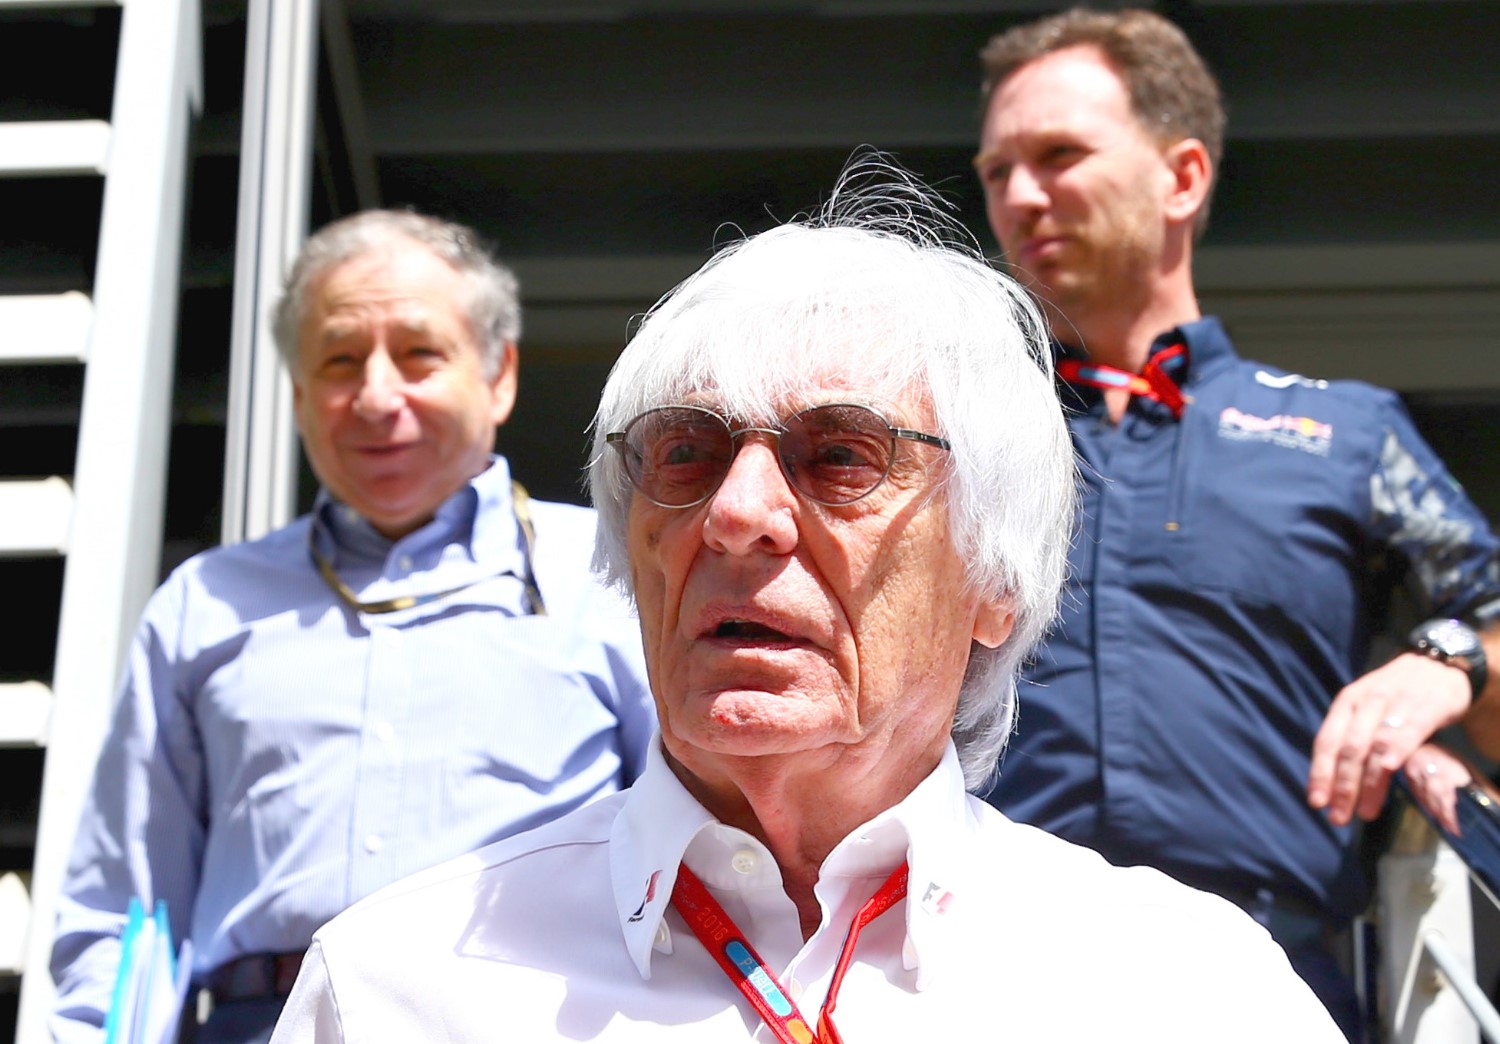 Ecclestone with Jean Todt and Christian Horner